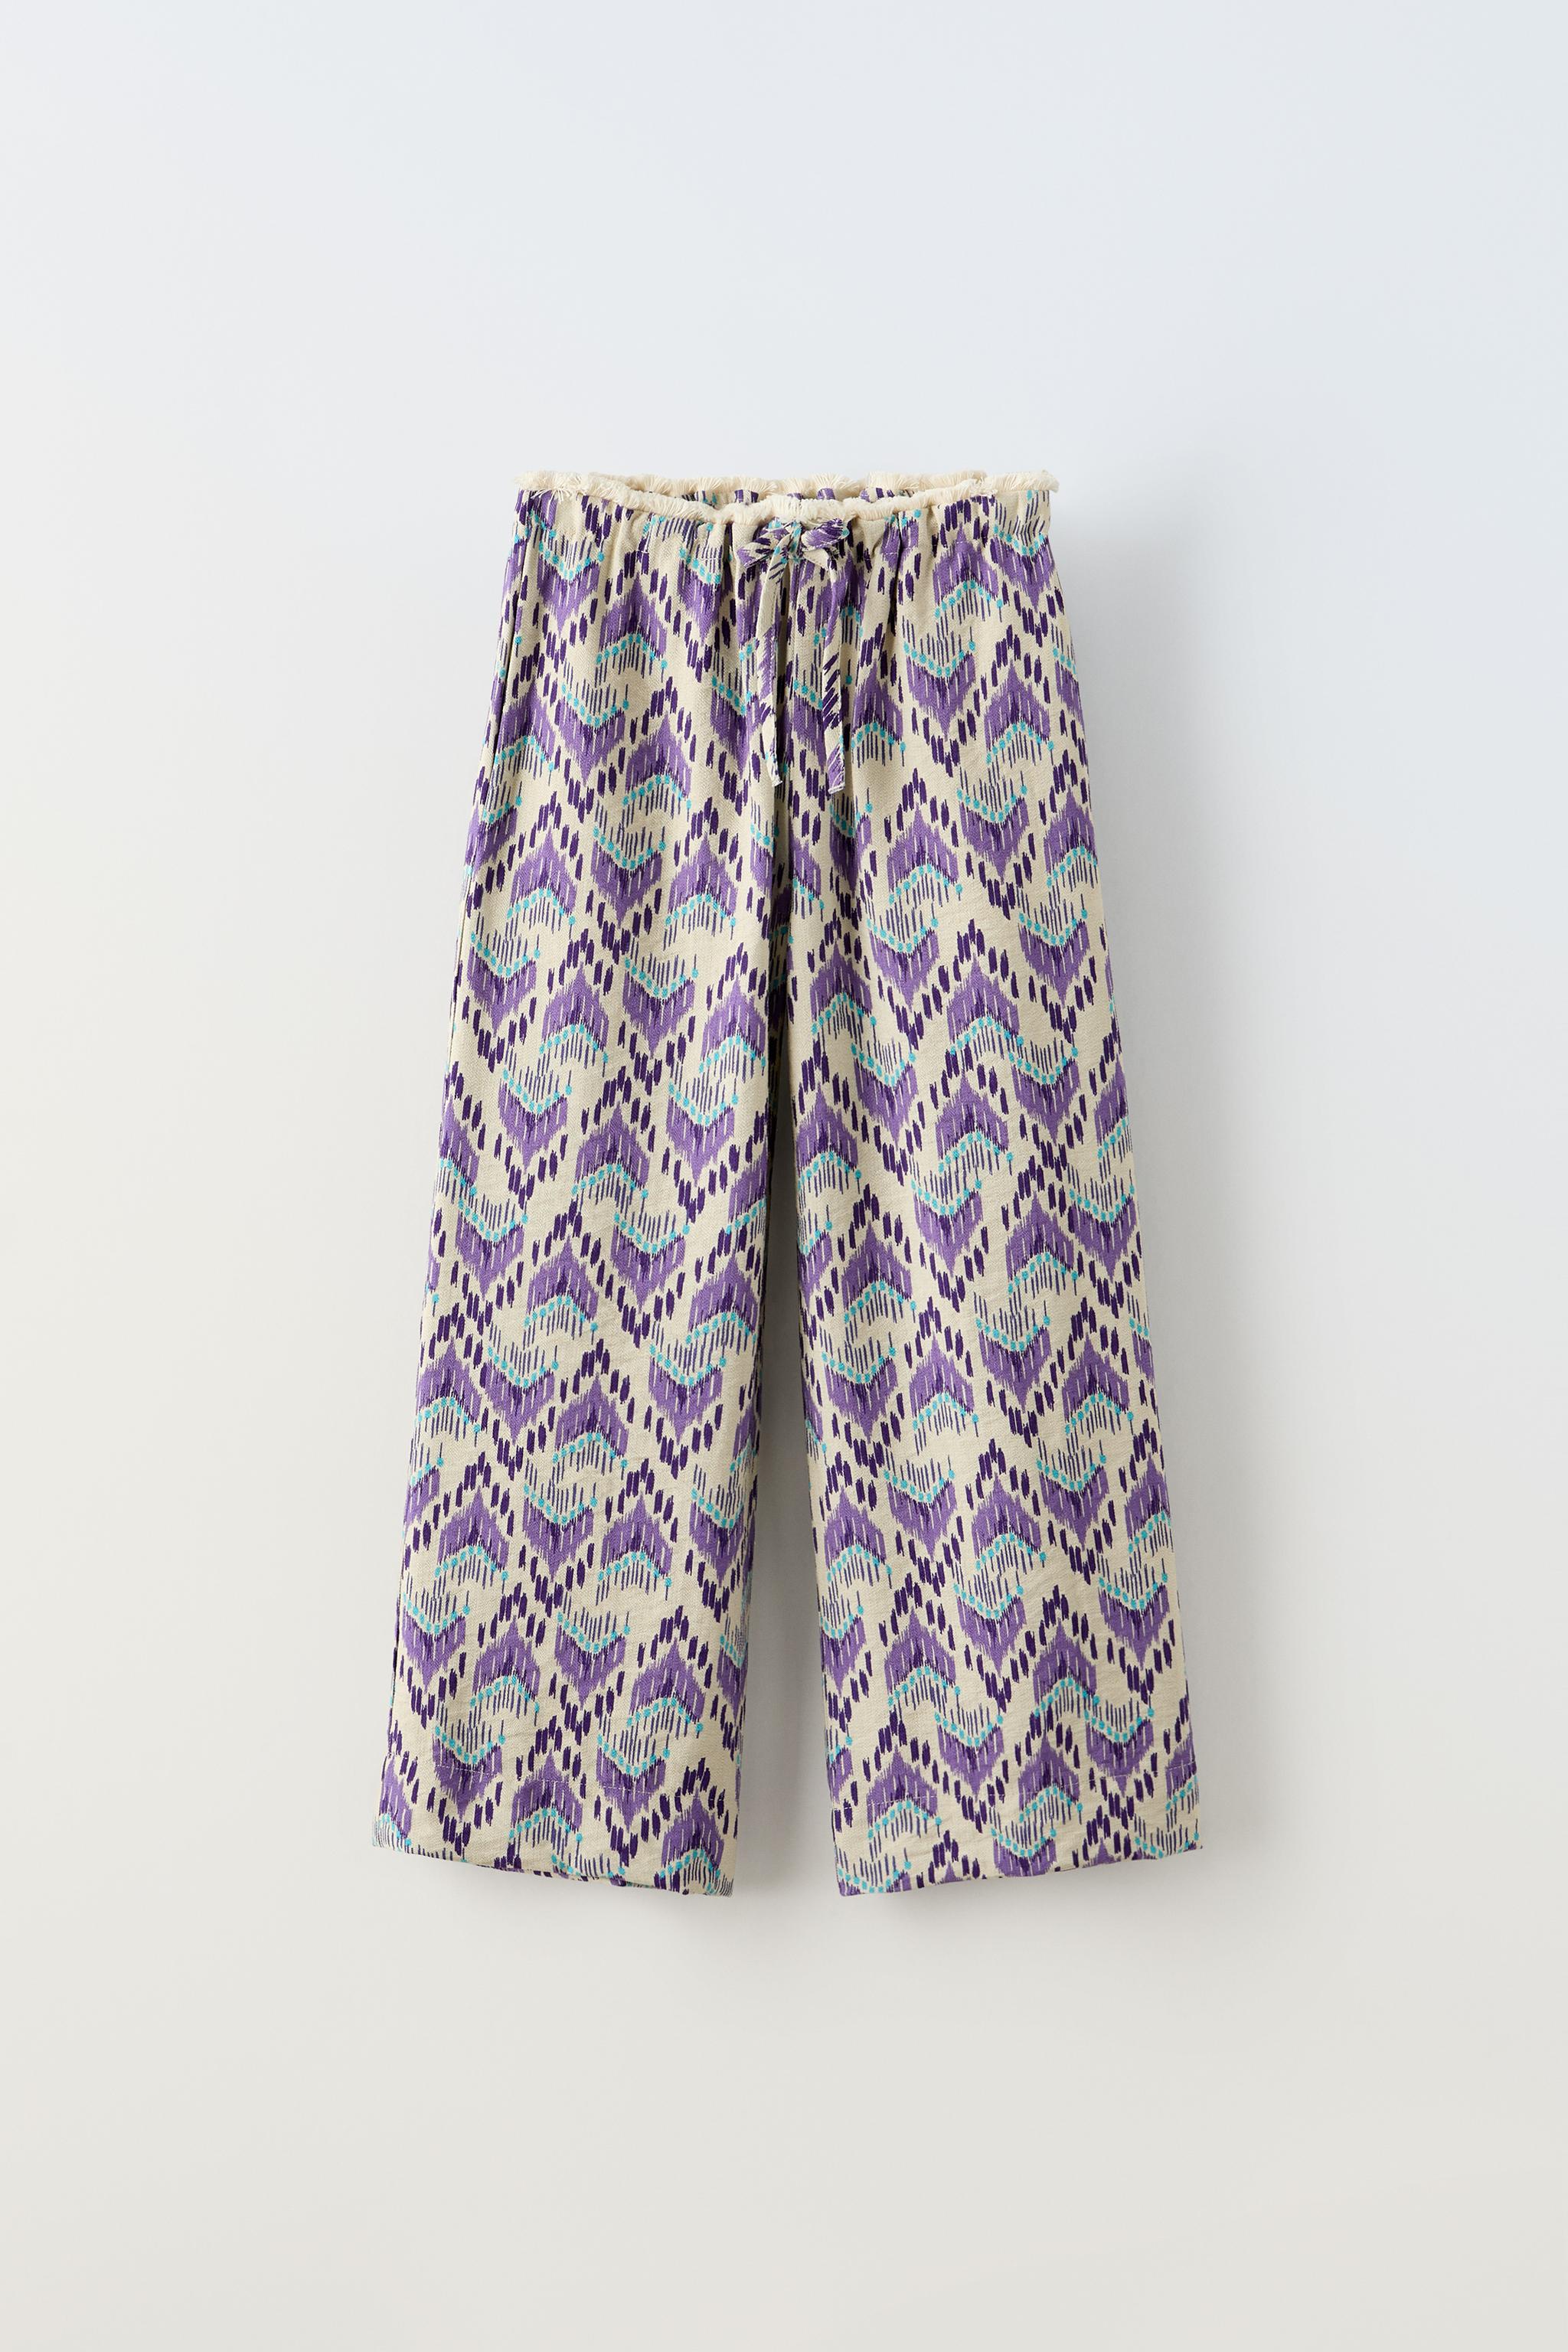 Pants and Leggings for Girls, Explore our New Arrivals